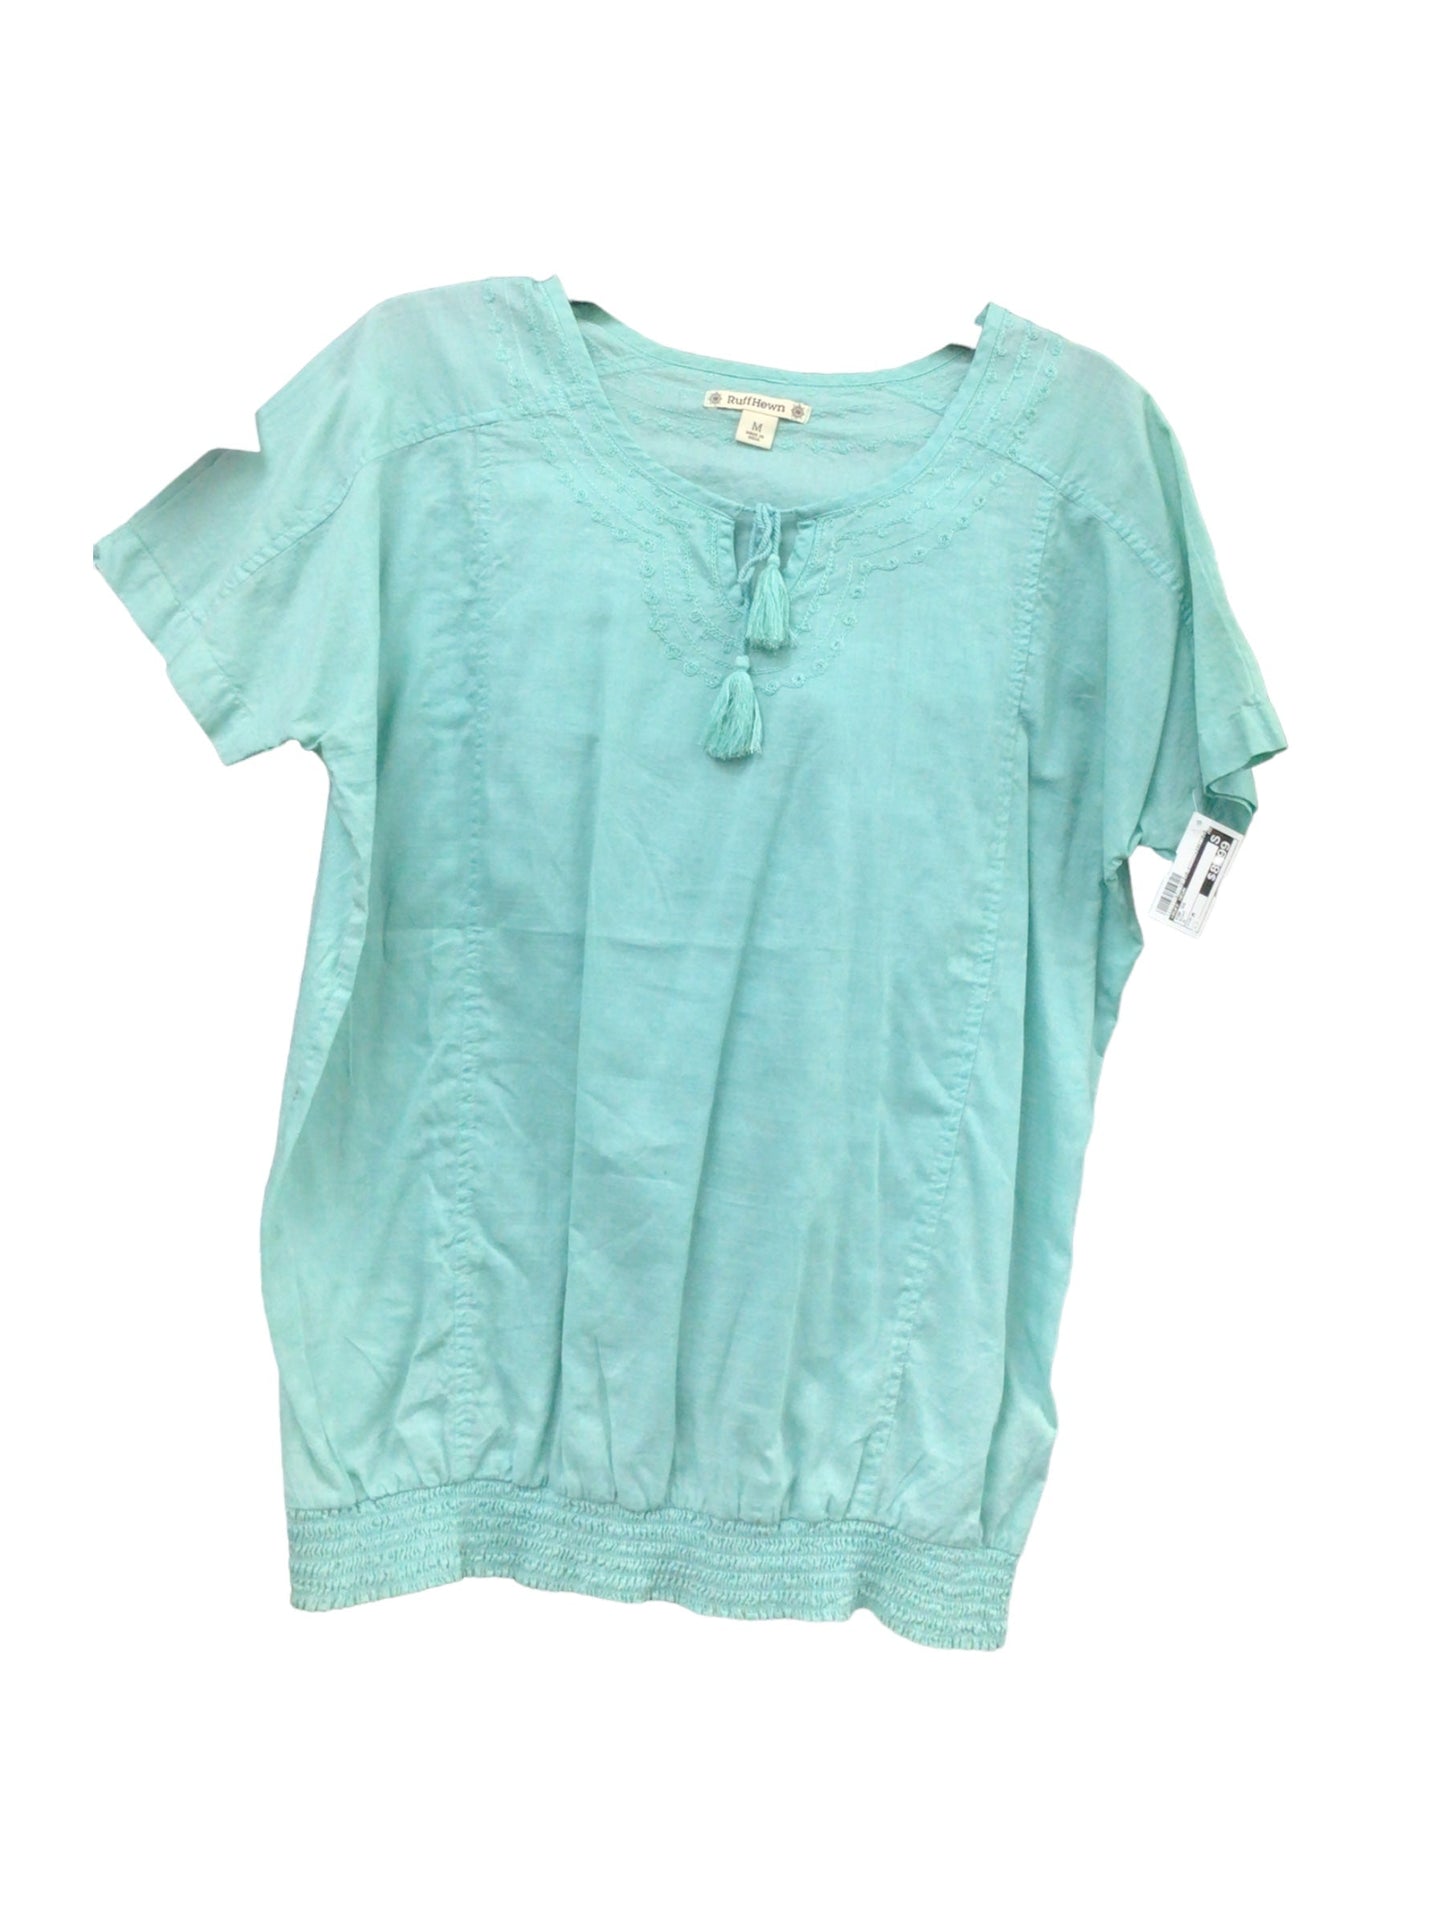 Top Short Sleeve By Ruff Hewn  Size: M